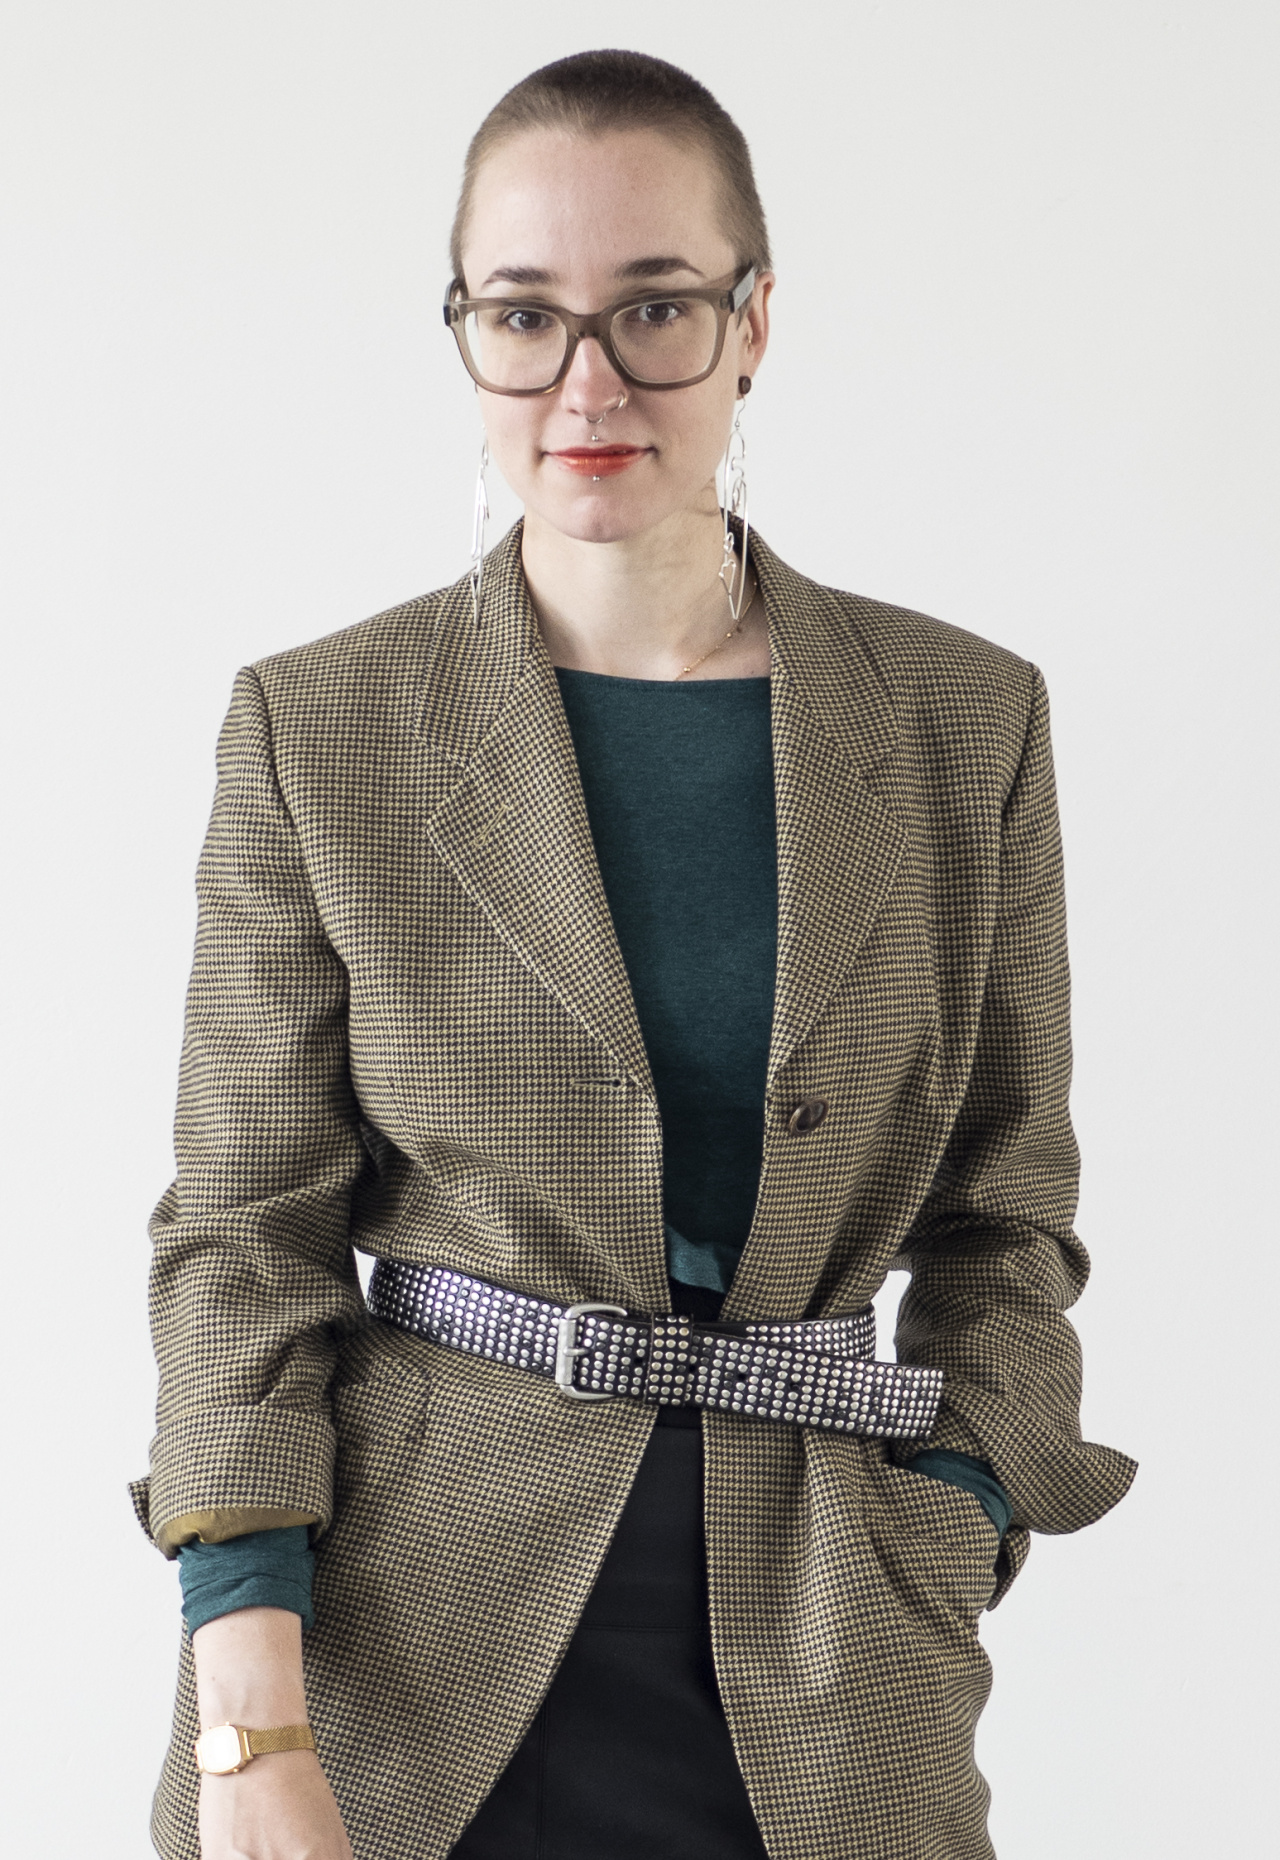 A young woman with glasses stands in front of a white background and wears a beige plaid coat.